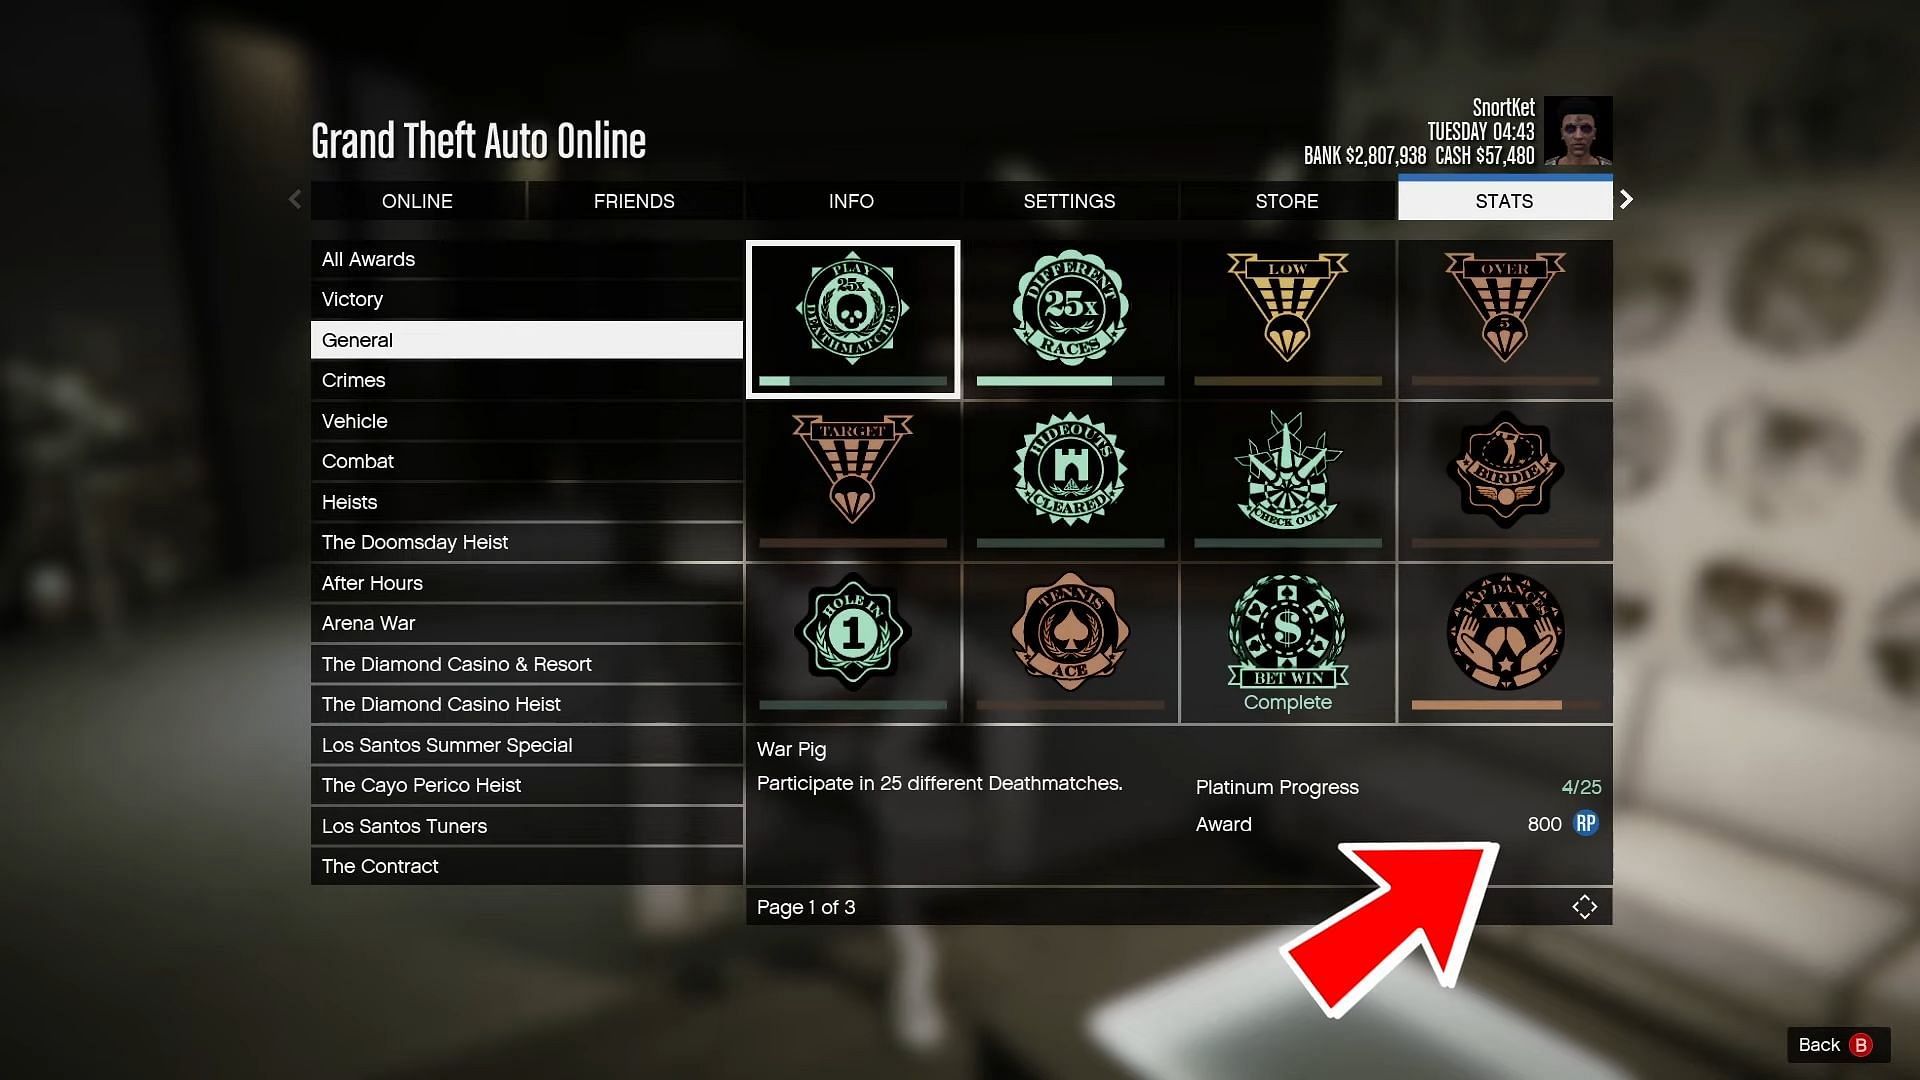 Reaching personal milestones can also get good RP rewards. (Image via YouTube/LazerSpart)